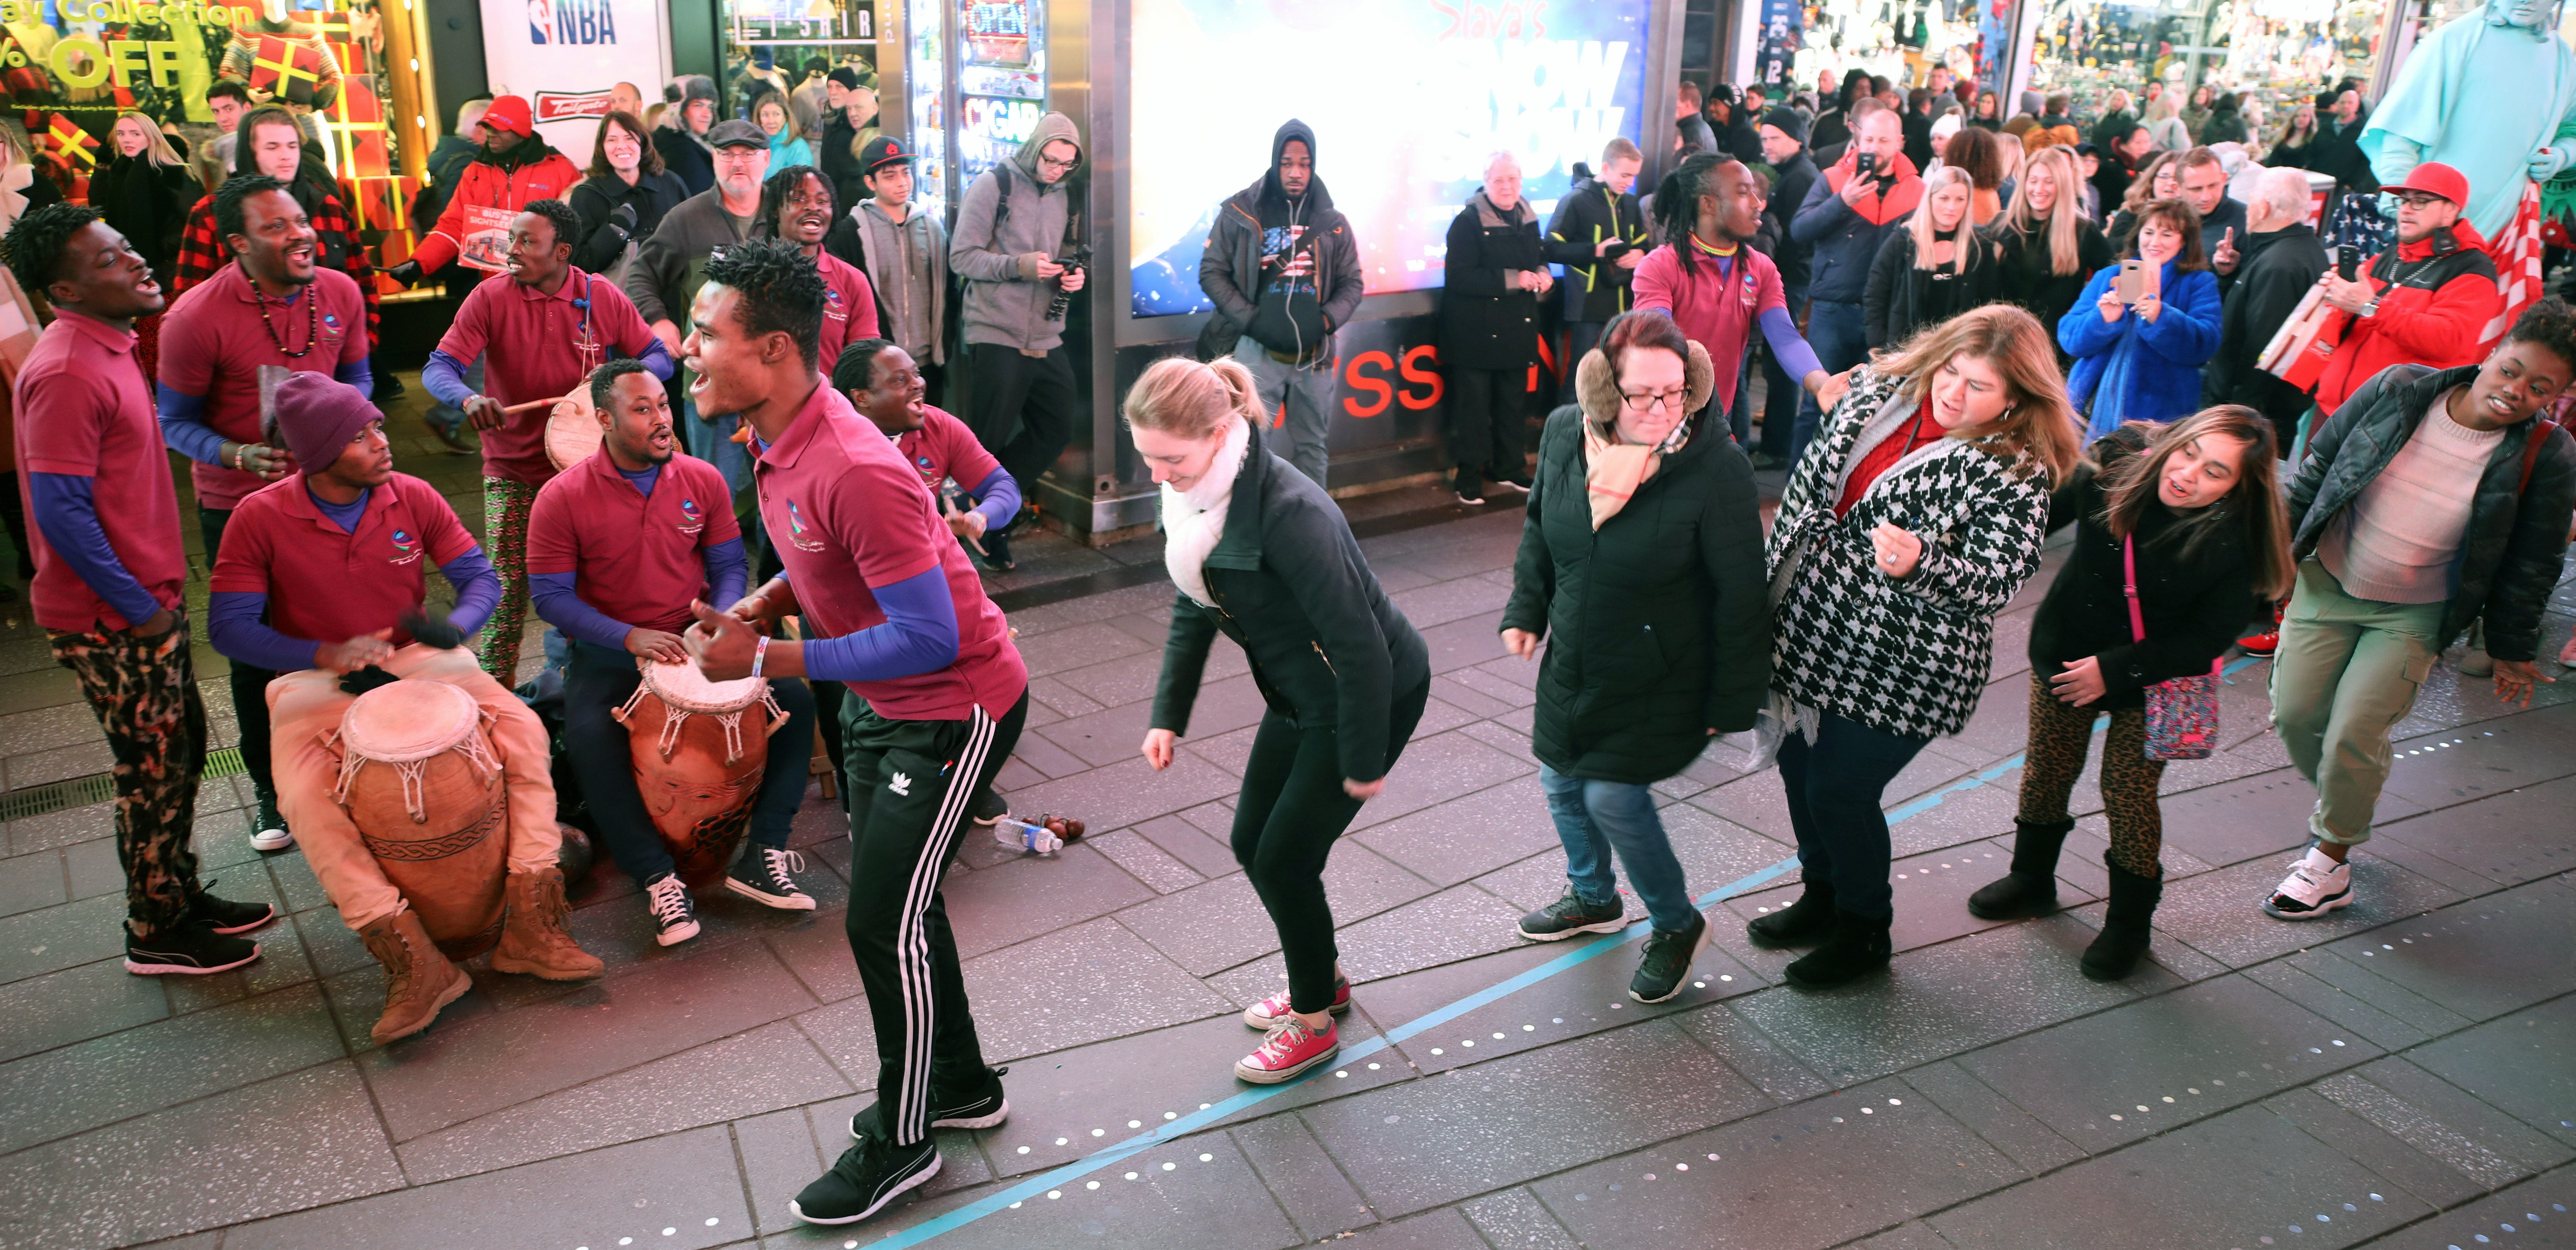 People from the crowd join Nii Tetteh Quarshie of Womba Africa, followed by Kate Huggler-Rubin, in a dance as the group busks in Times Square.